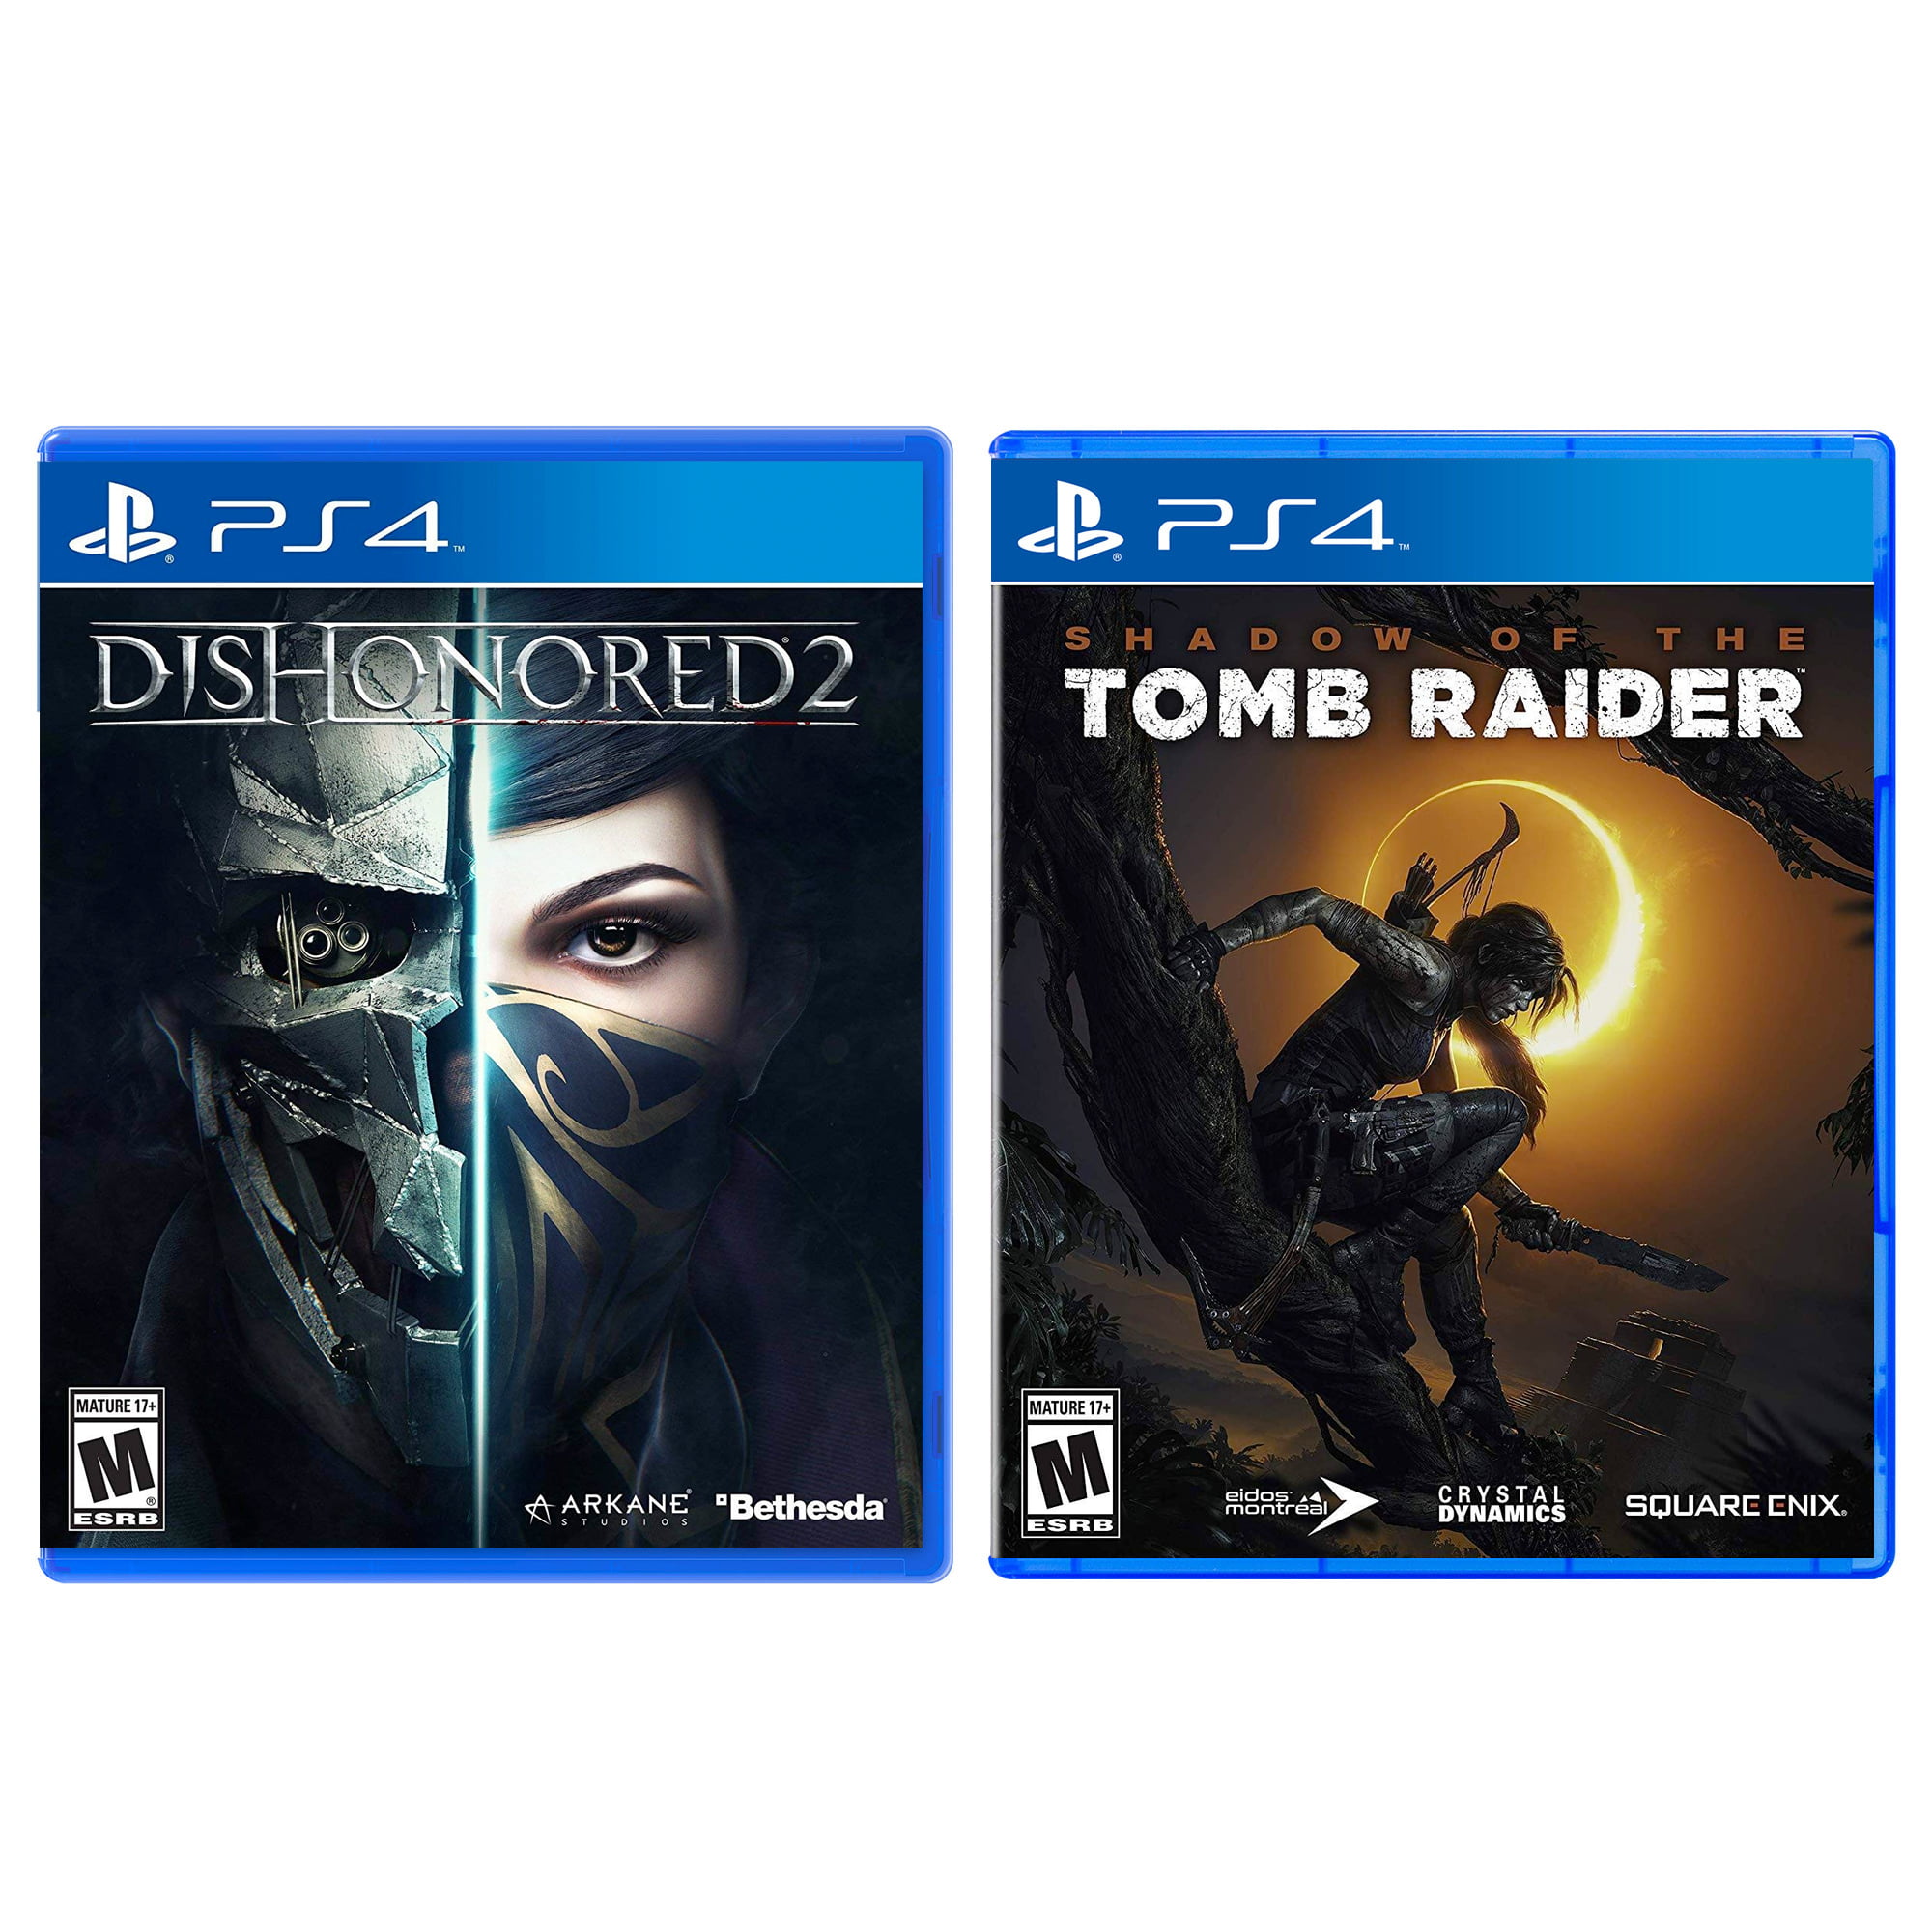 Dishonored 2 and Shadow of the Tomb Raider Game Bundle - PlayStation 4 